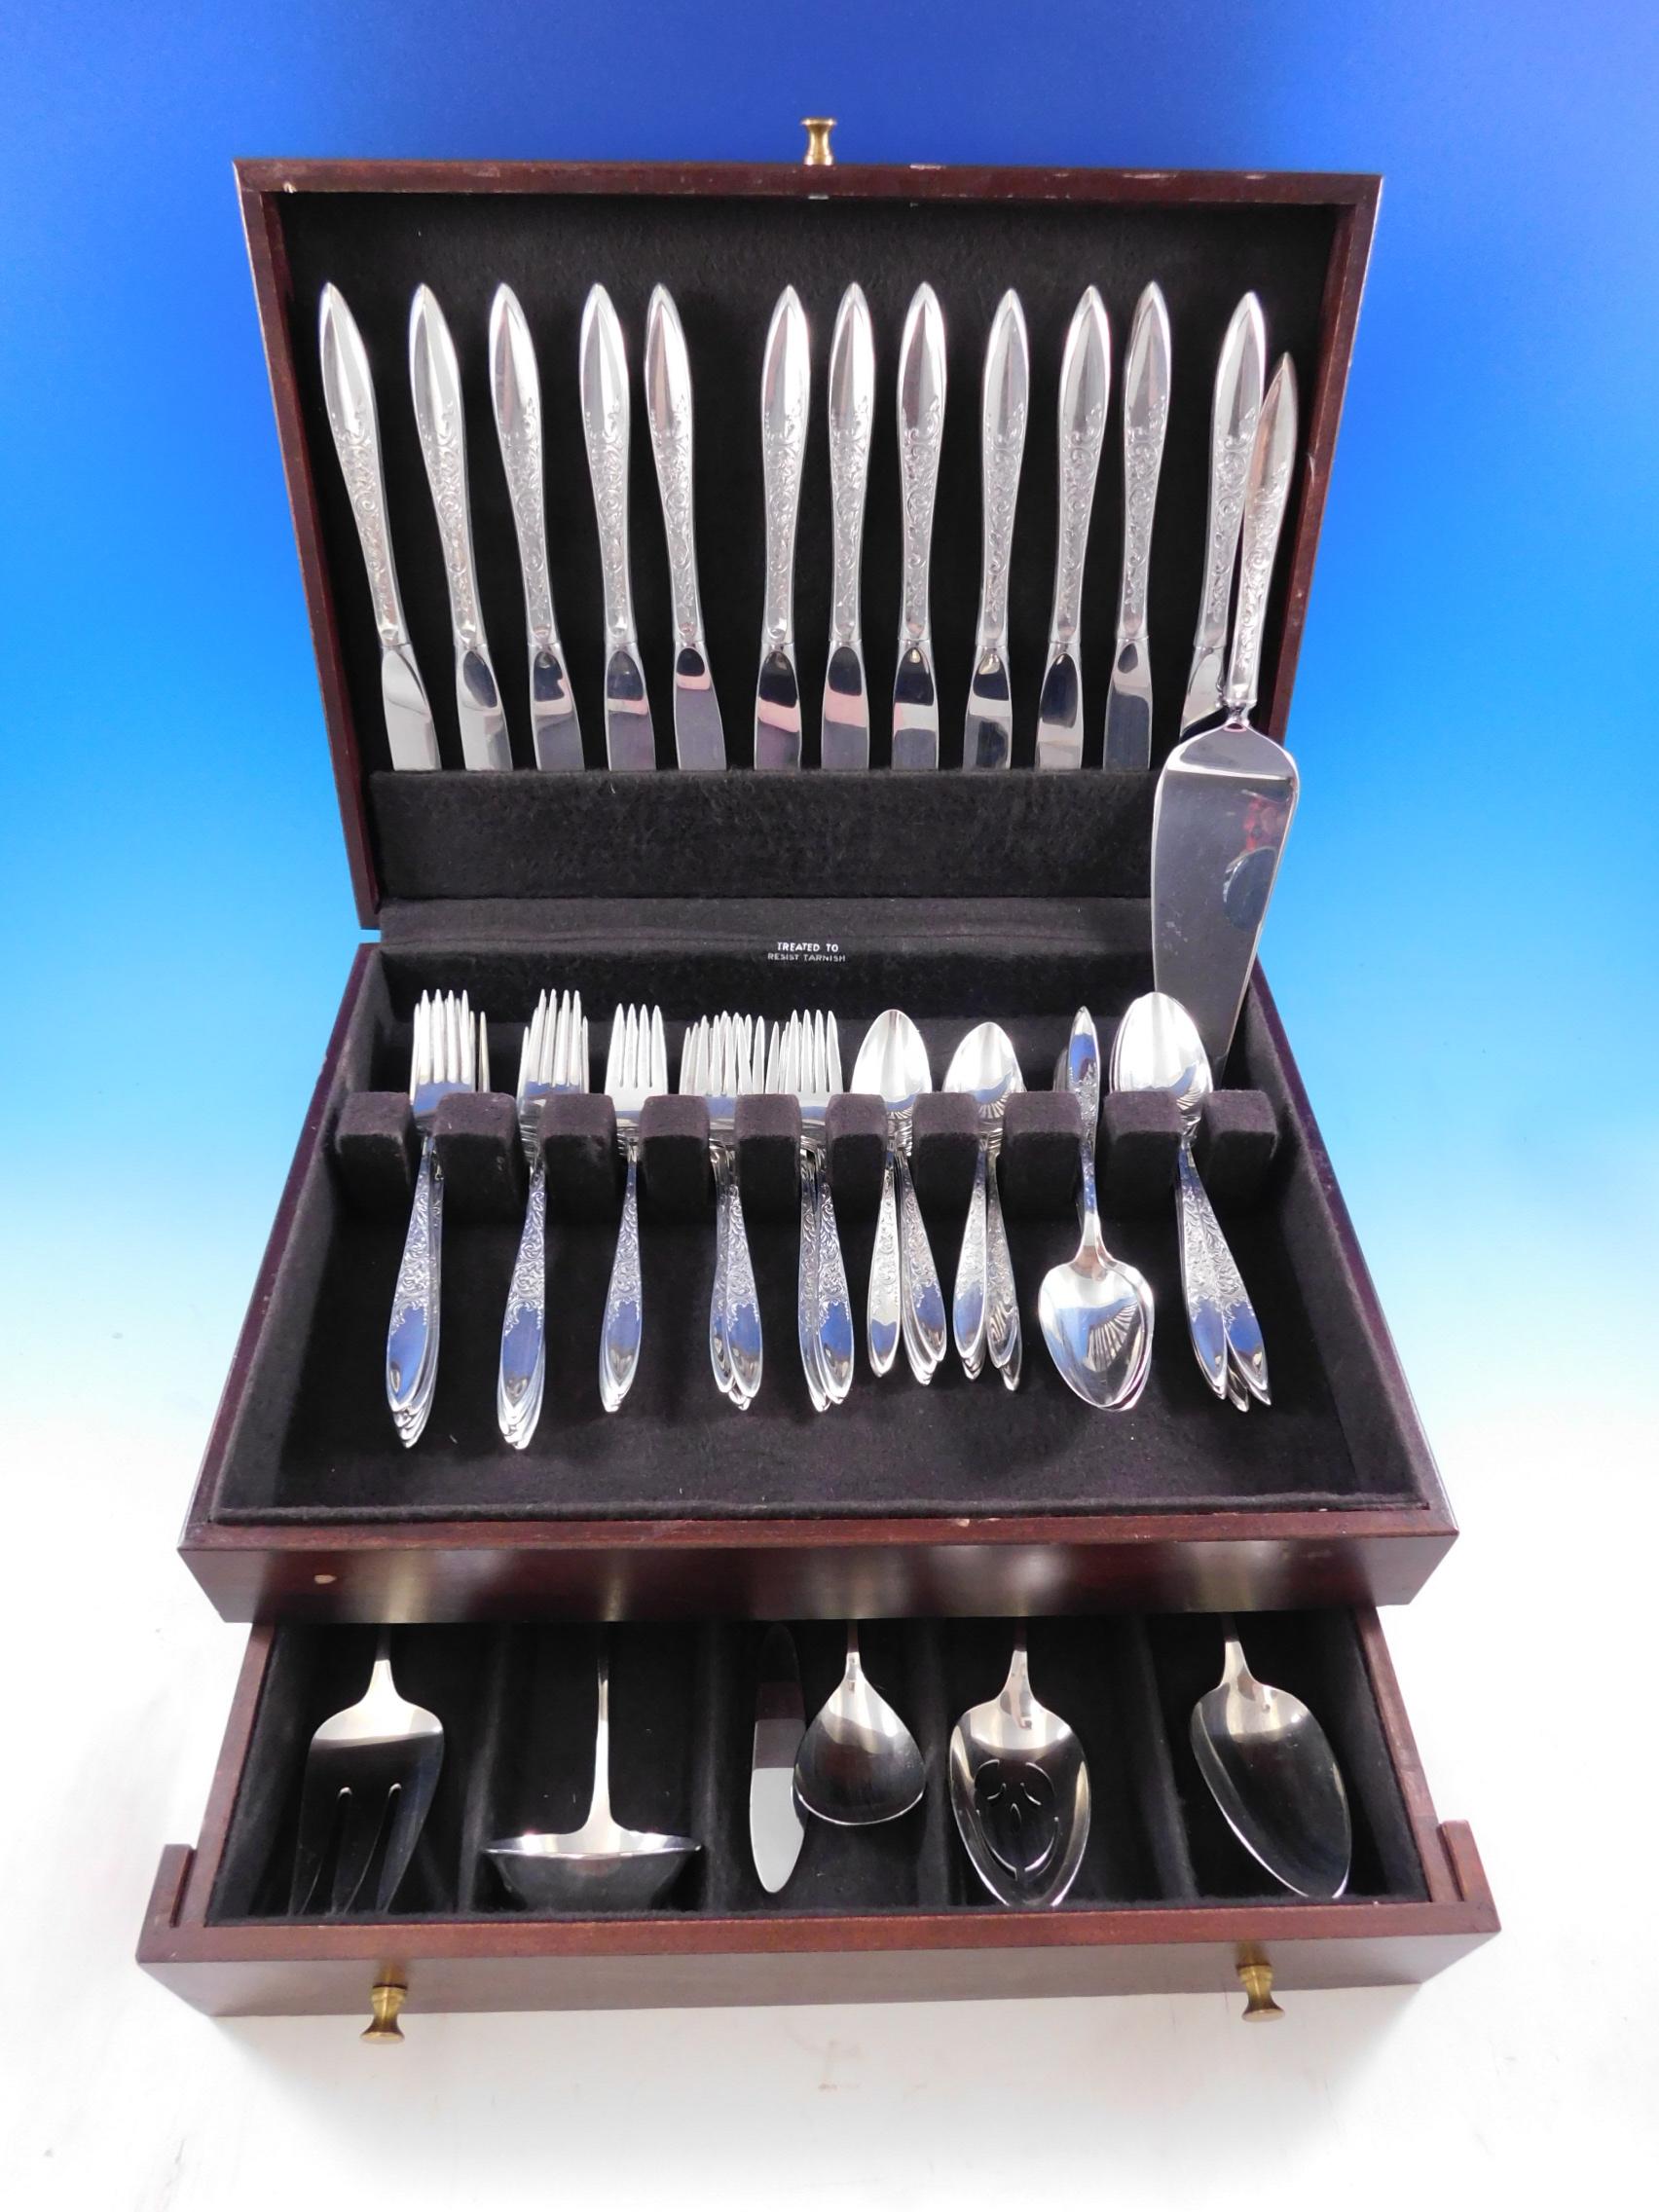 White Paisley by Gorham sterling silver Flatware set - 67 pieces. This pattern was introduced in the year 1966 and features a contemporary shaped handle that is partially engraved with flowing scrolls and floral detailing. This set includes:

12